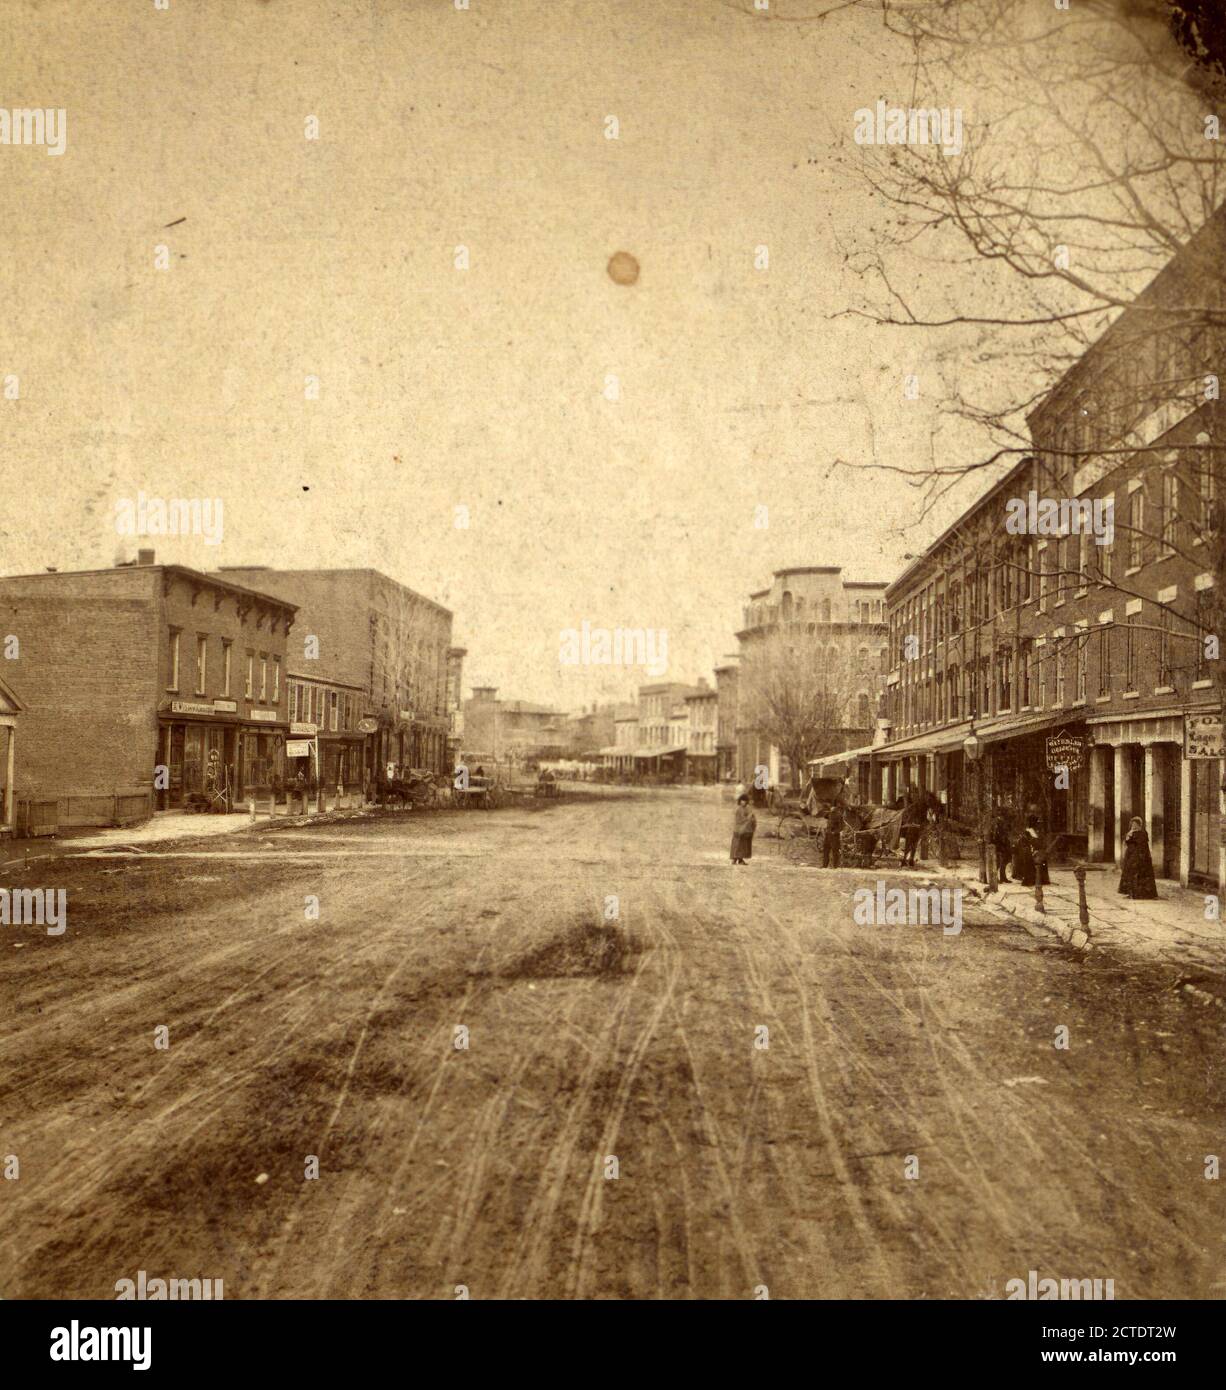 Looking West, Main Street, Waterloo, N.Y., MR. E Sig.ra C.V.D. Cornell, Streets, Commercial Buildings, New York (state Foto Stock